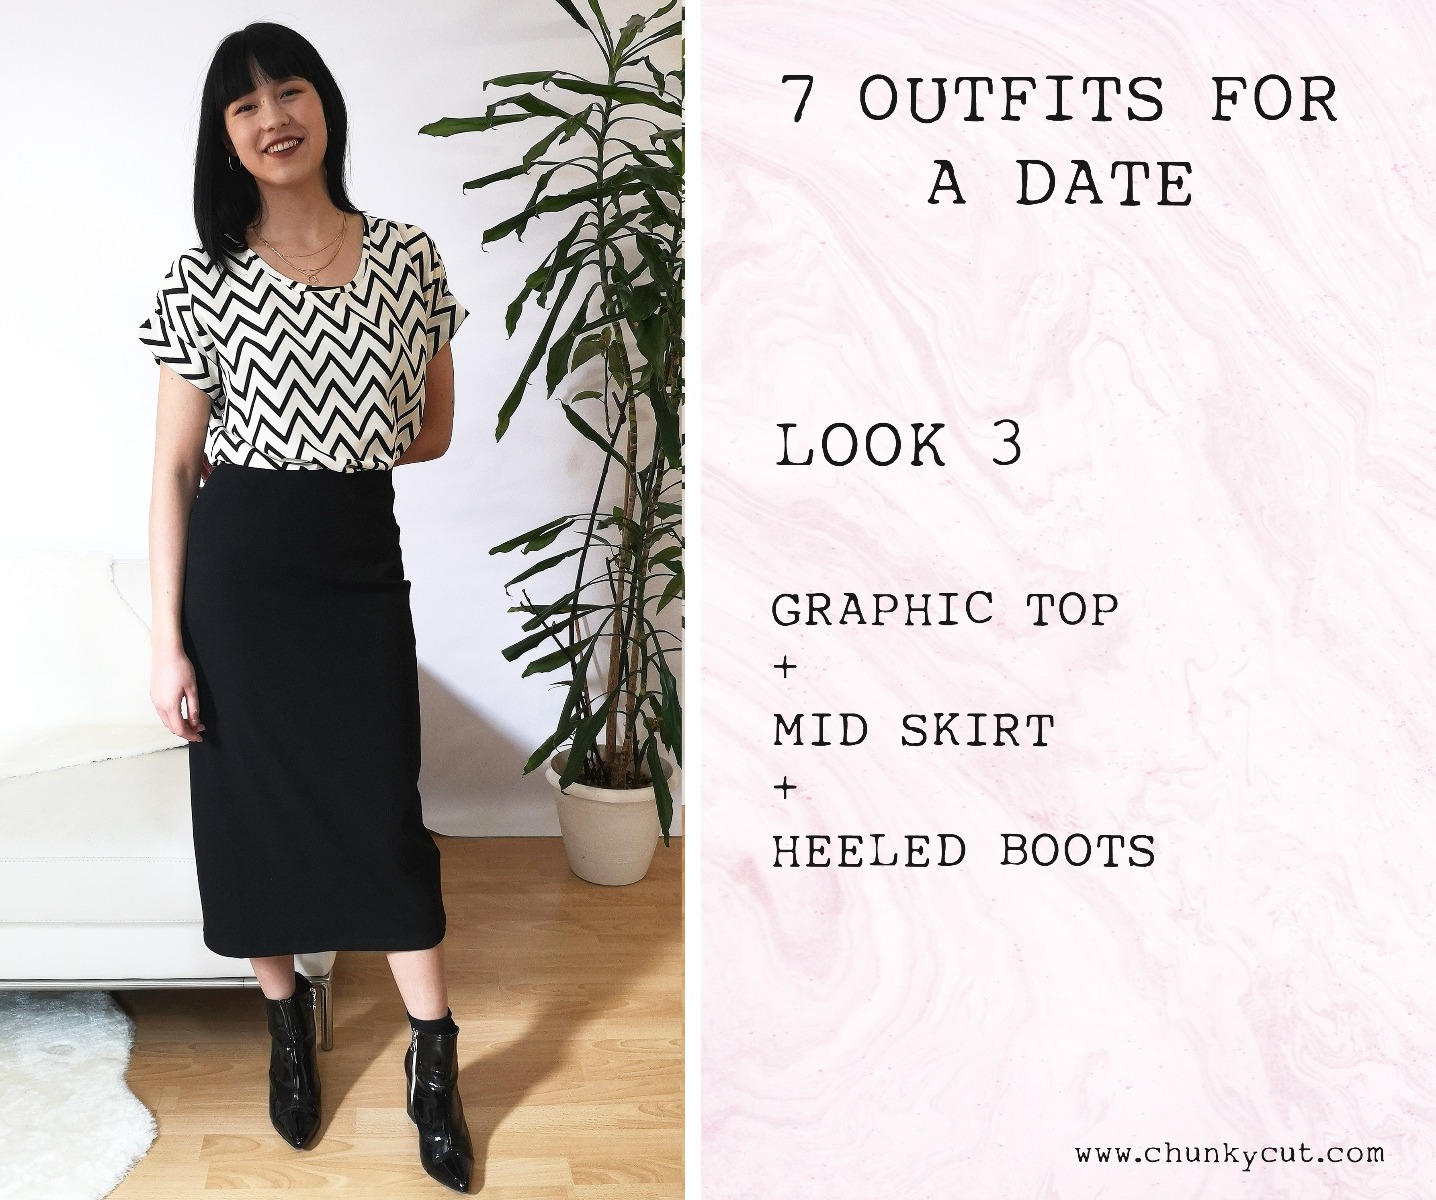 Look 3 with graphic zigzag top, mid skirt and heeled boots